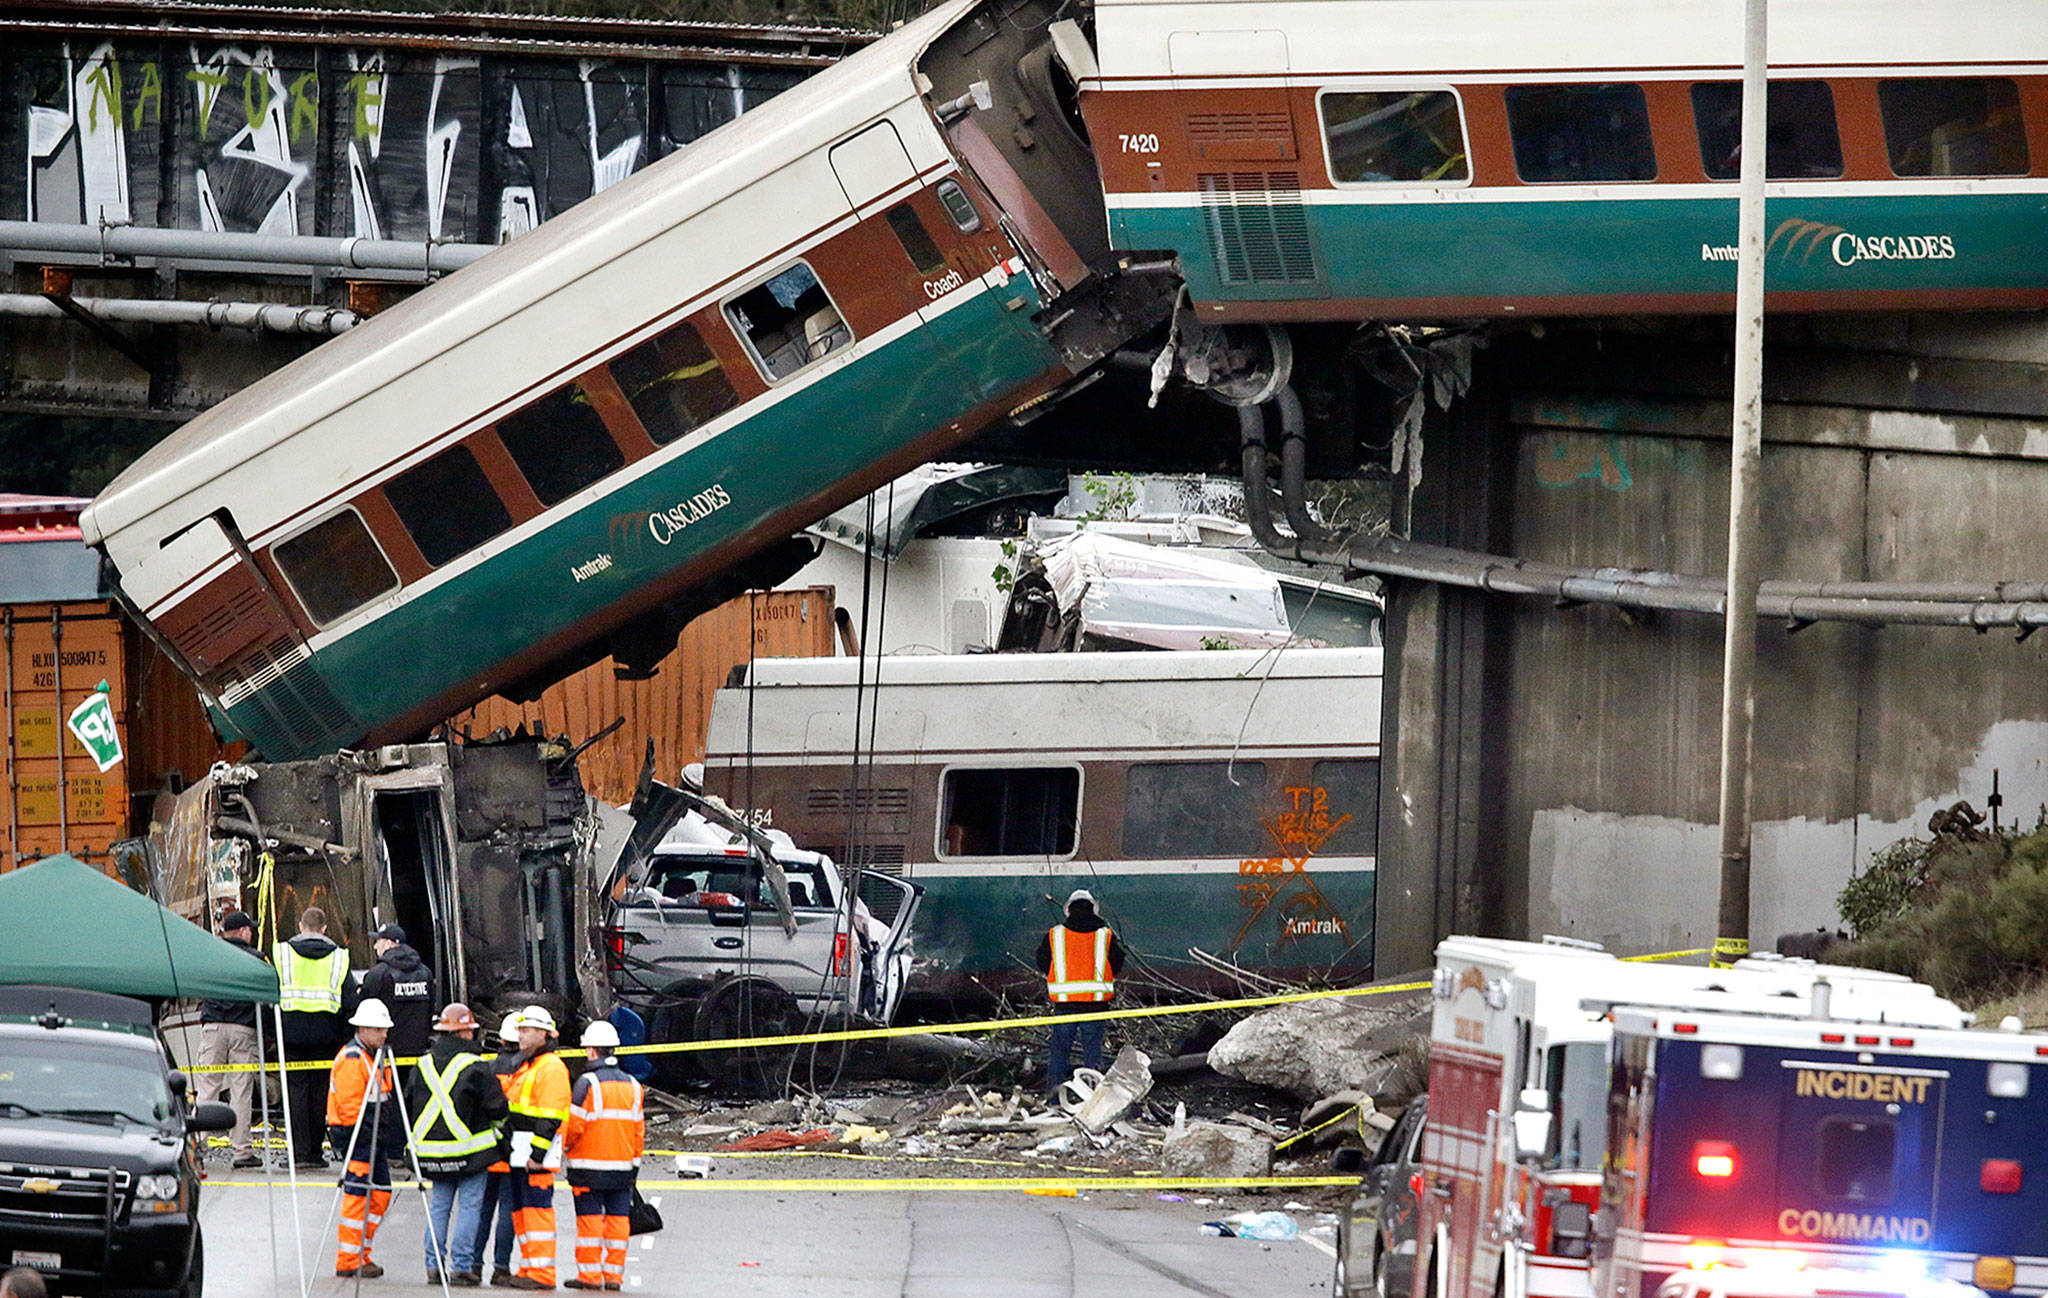 Cars from an Amtrak train spilled onto Interstate 5 after a derailment Monday near DuPont. (AP Photo/Elaine Thompson)